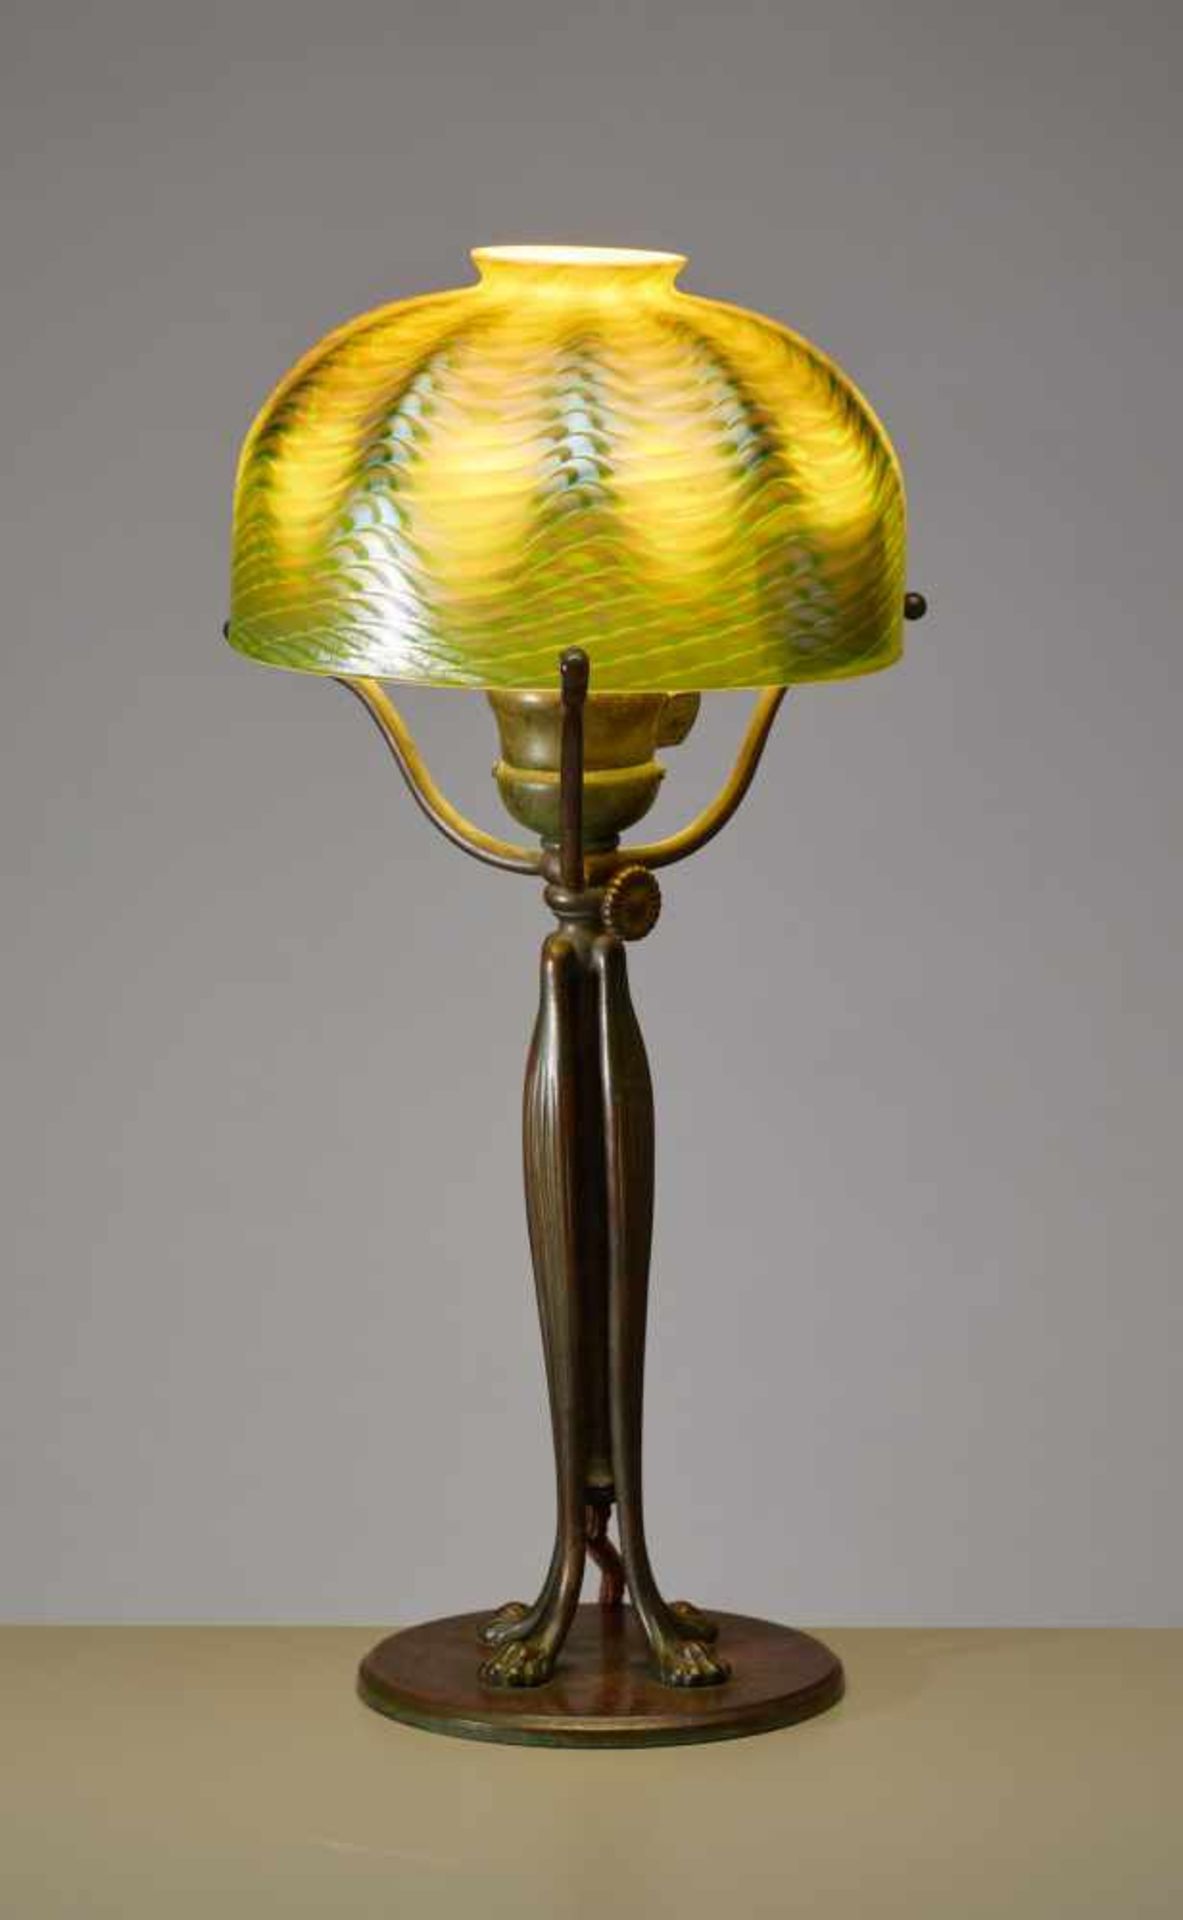 TIFFANY, FAVRILE TABLE LAMP, USA 1905Louis Comfort Tiffany (1848-1933) – American painter and - Image 3 of 10